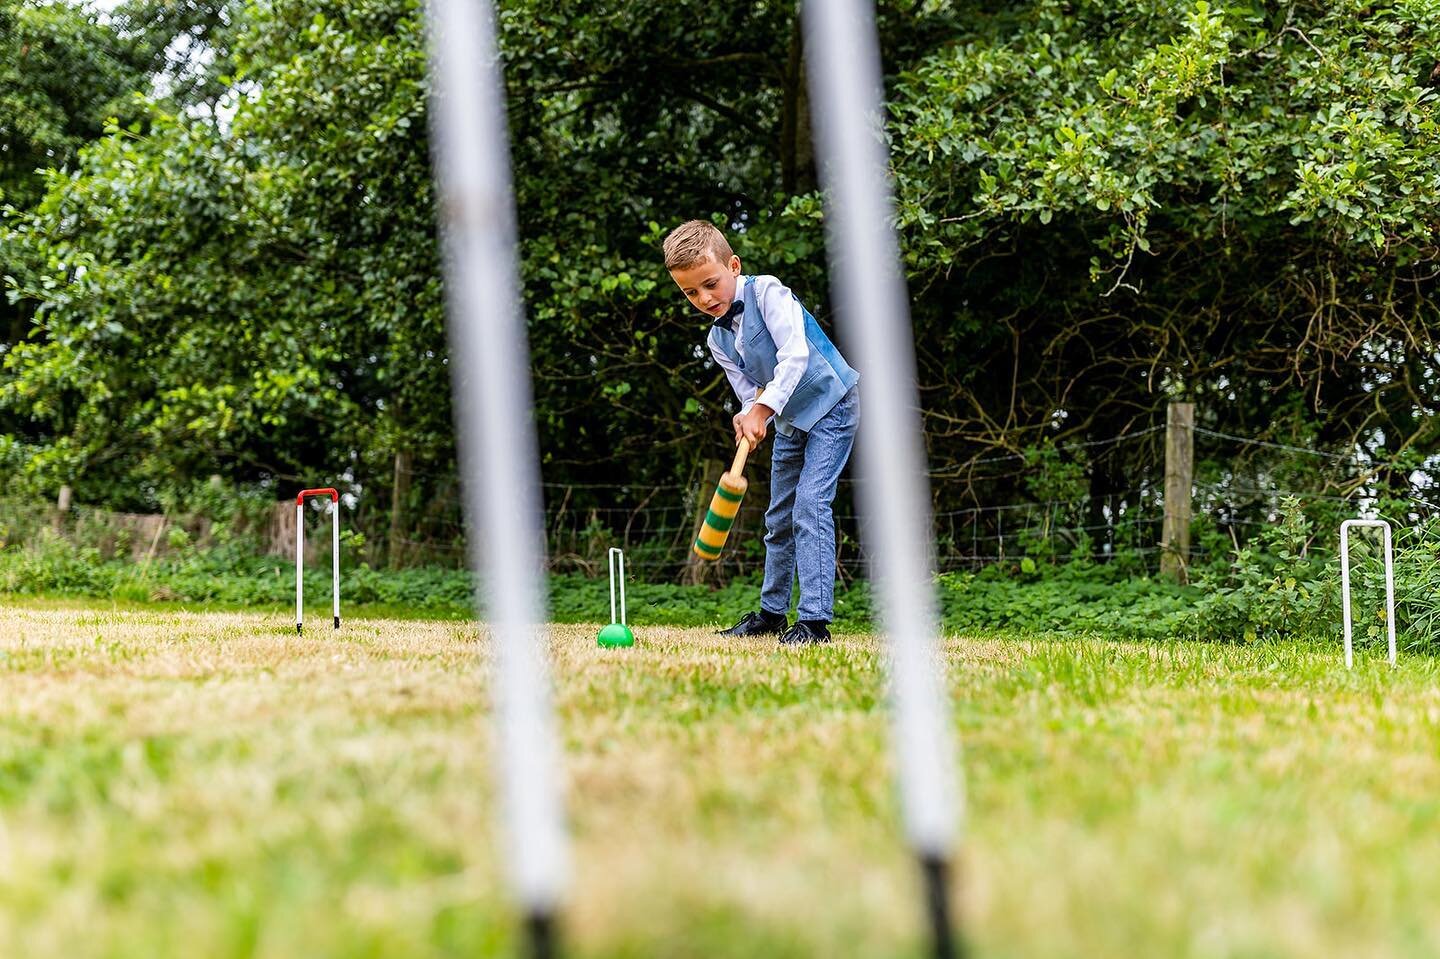 Garden Games | Want to keep your friends and family entertained during your reception? We&rsquo;ve plenty of space for garden games of your choice! 

Croquet and giant jenga are nice and simple but always go down a treat on a sunny afternoon with a g